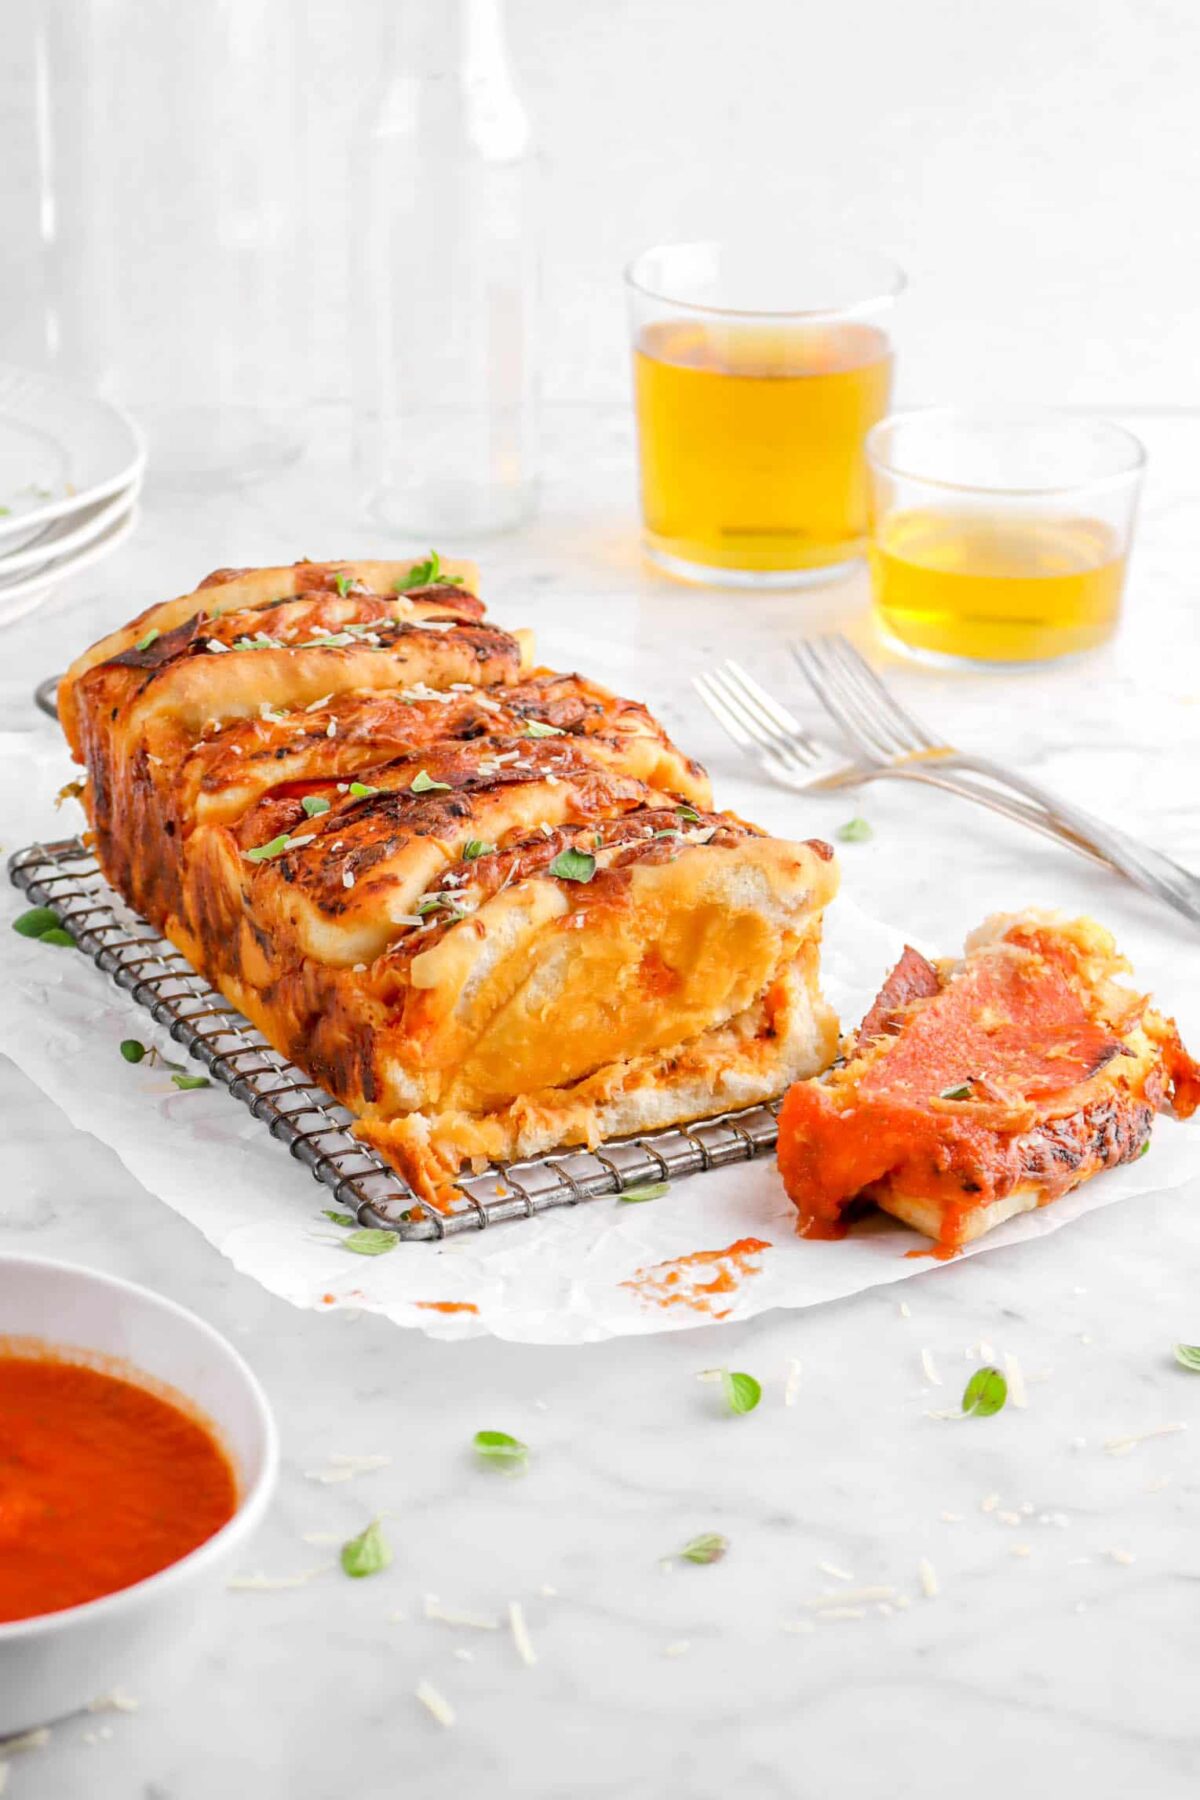 pizza bread on wire cooling rack with two glasses of beer behind, two forks, and slice that has been dipped in tomato sauce in front